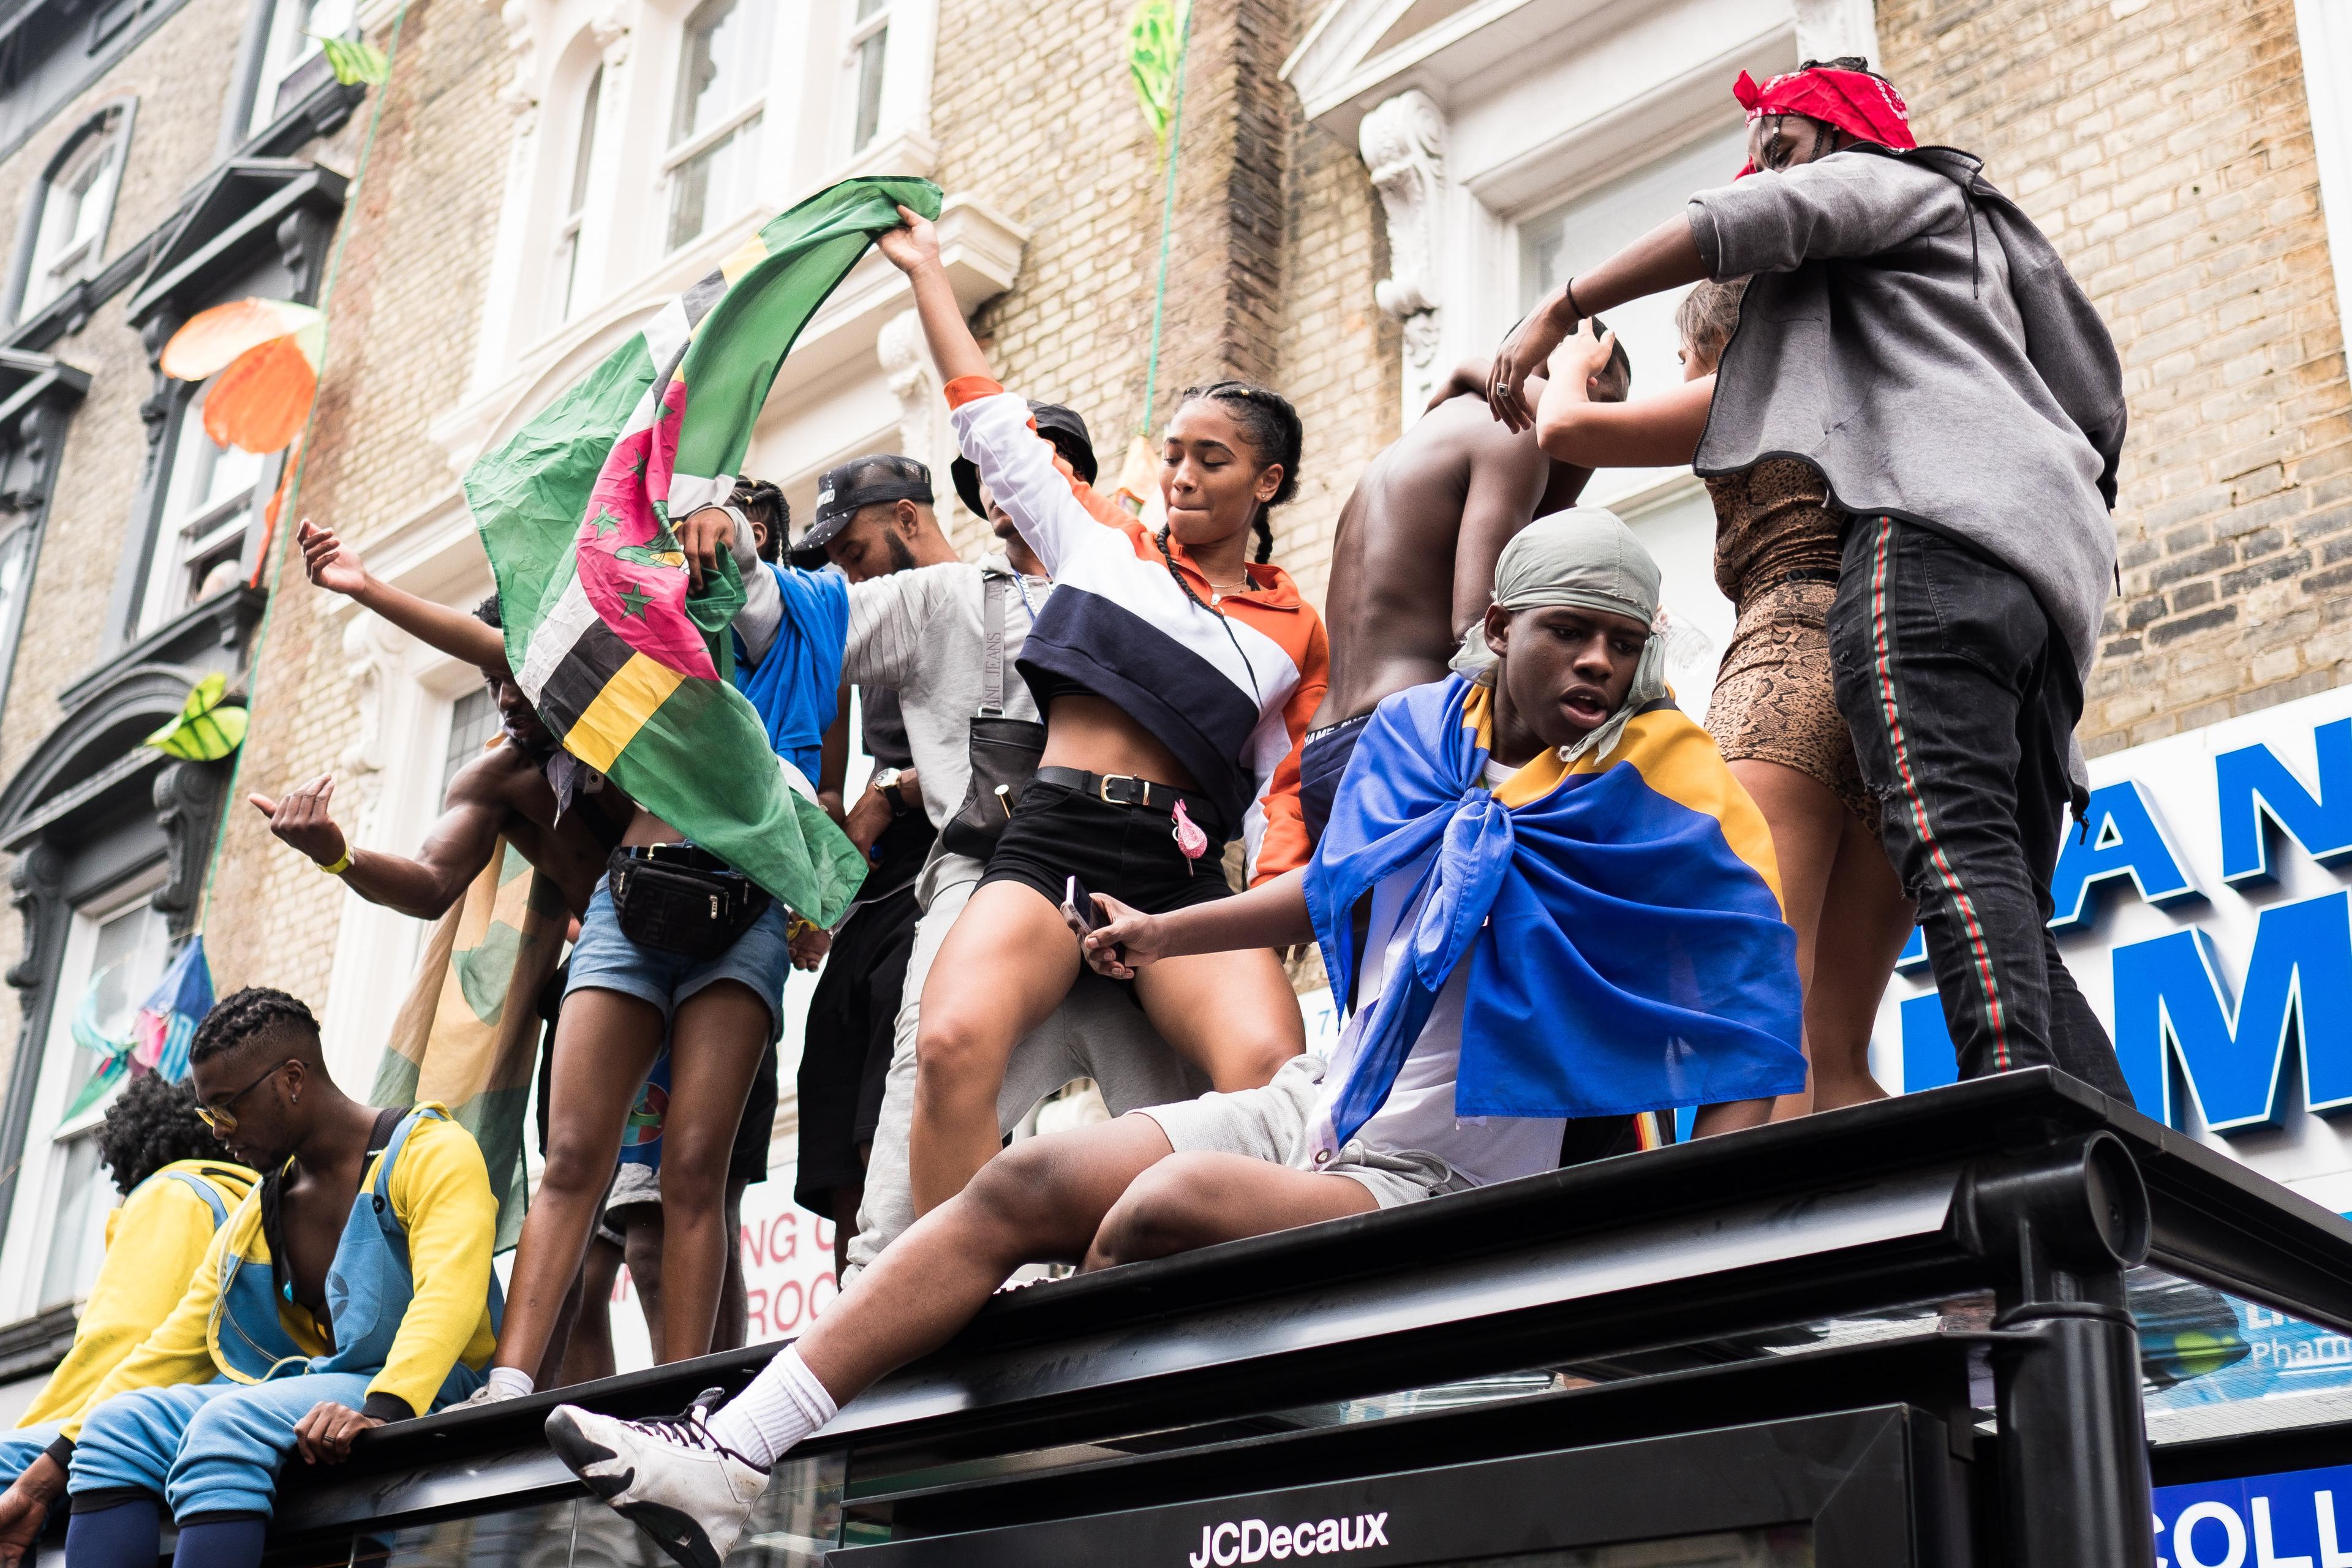 People are celebrating Notting Hill Carnival on the streets 